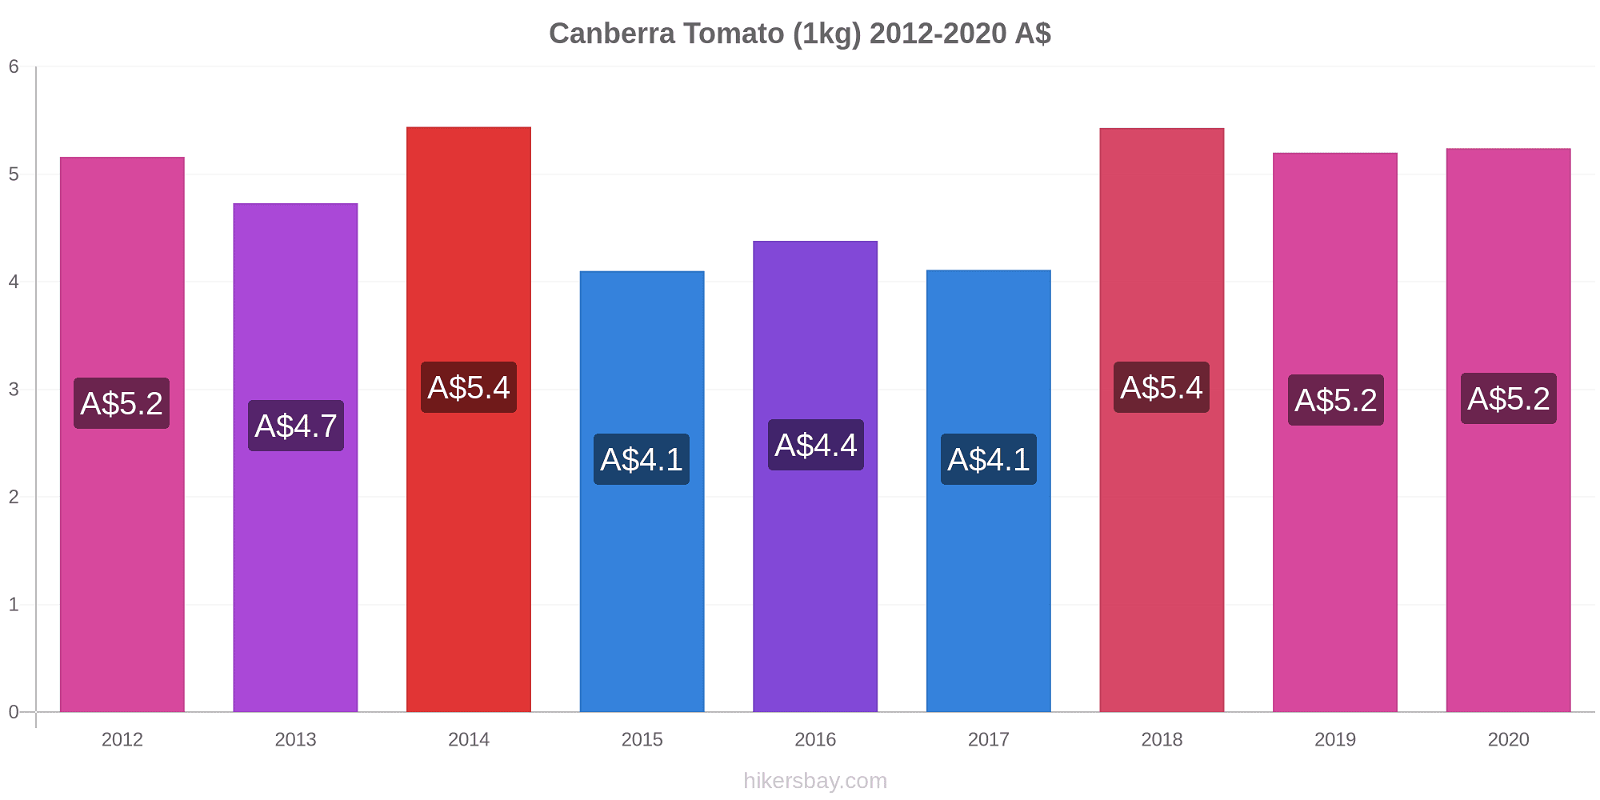 Canberra price changes Tomato (1kg) hikersbay.com